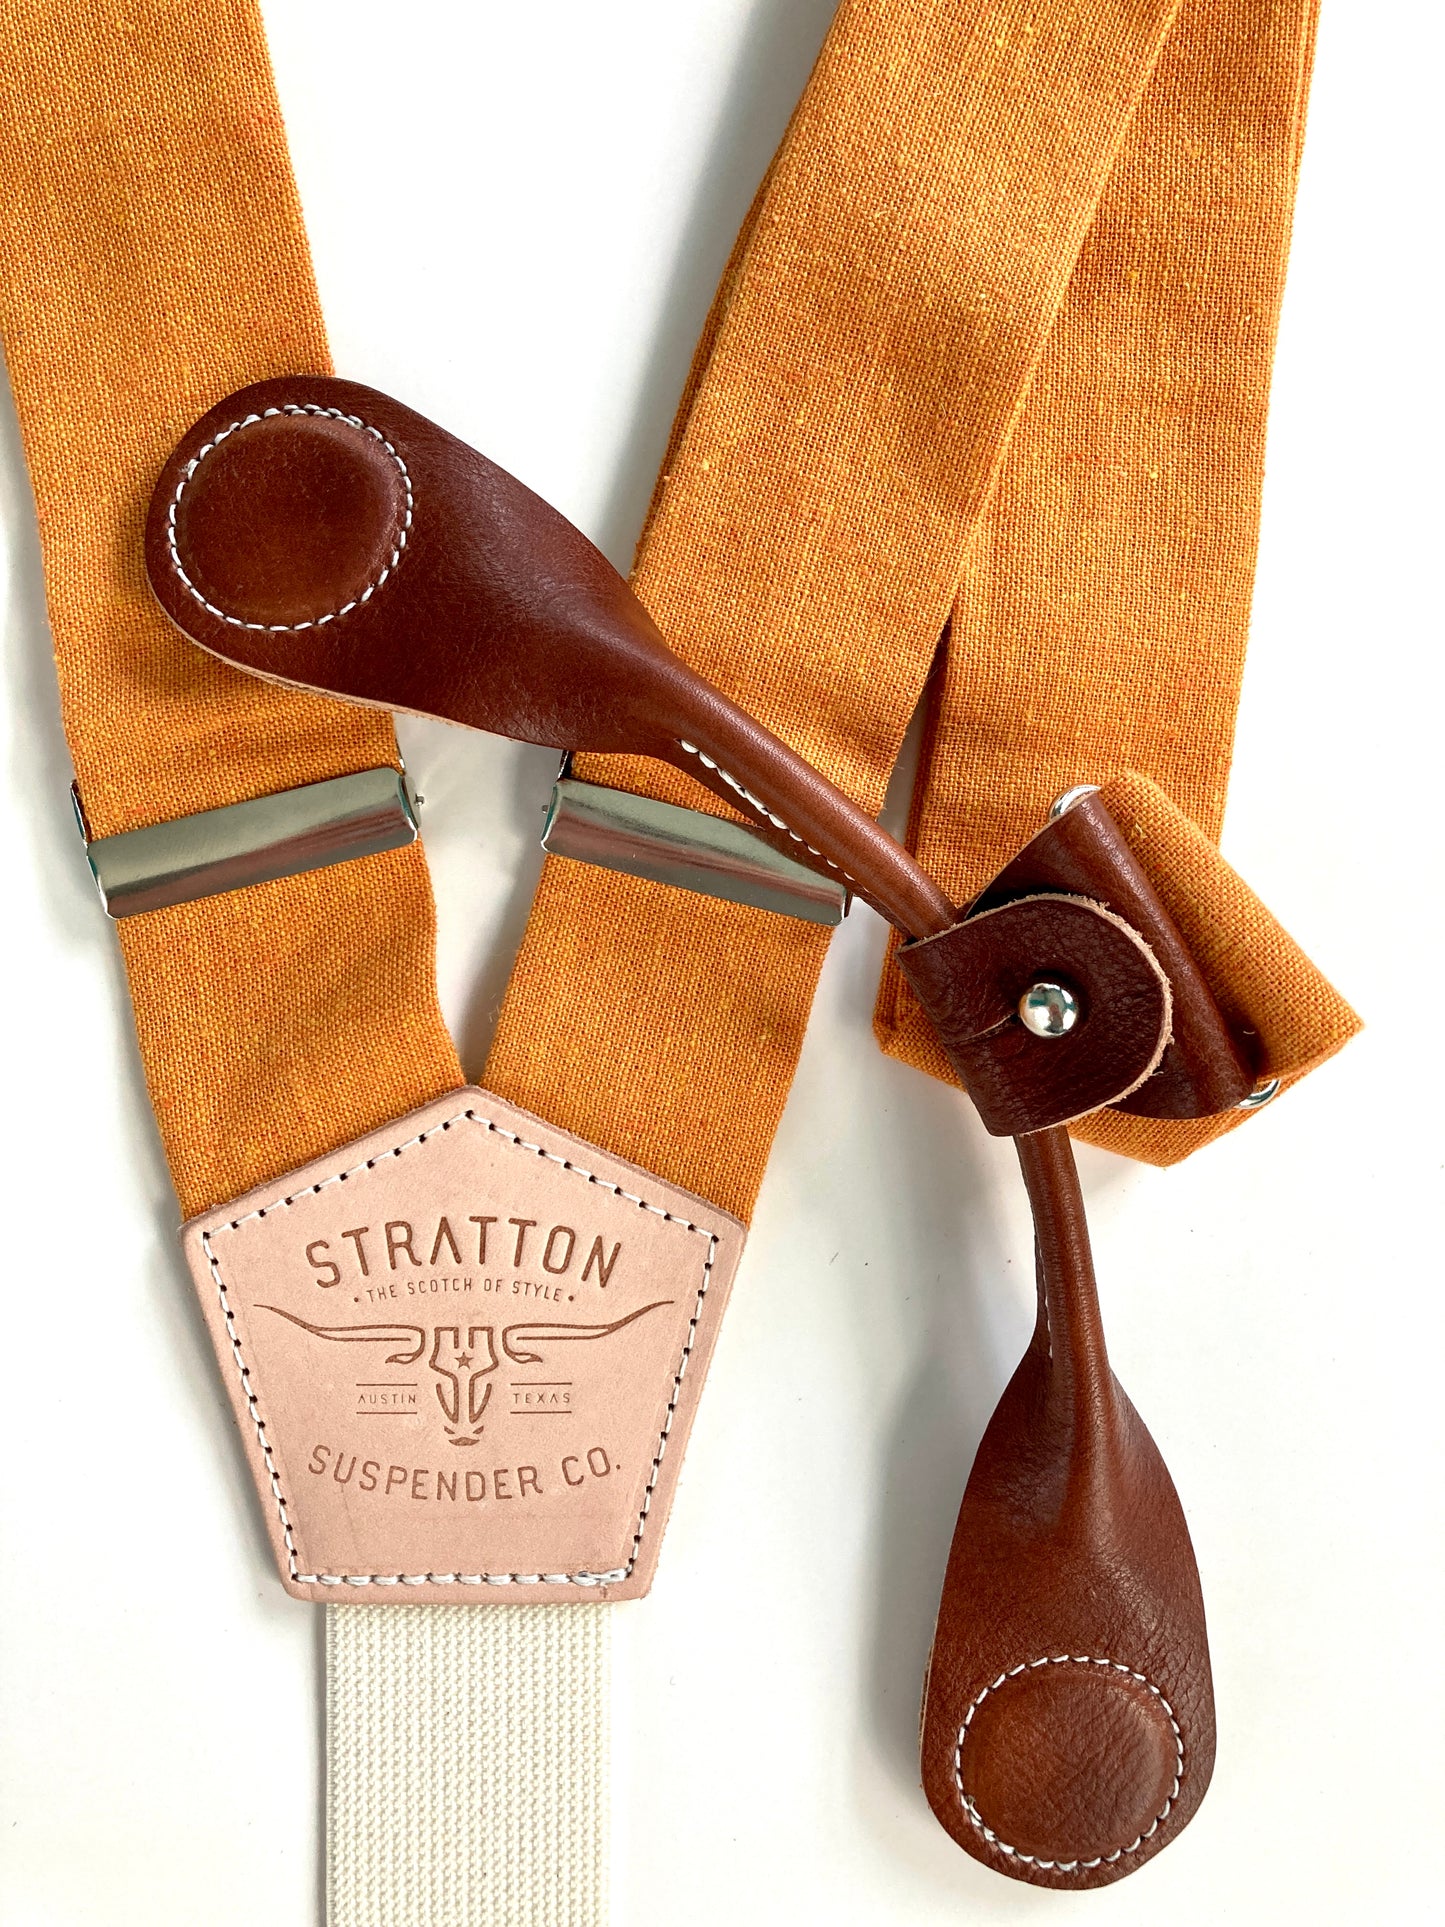 Stratton Suspender Co. features the orange linen suspenders on veg tan shoulder leather with cream colored elastic back strap for the Fall 2022 suspenders collection Magnetic Stratton Suspender clasps in Cognac Pontedero Italian leather hand-picked by Stratton Suspender Co.